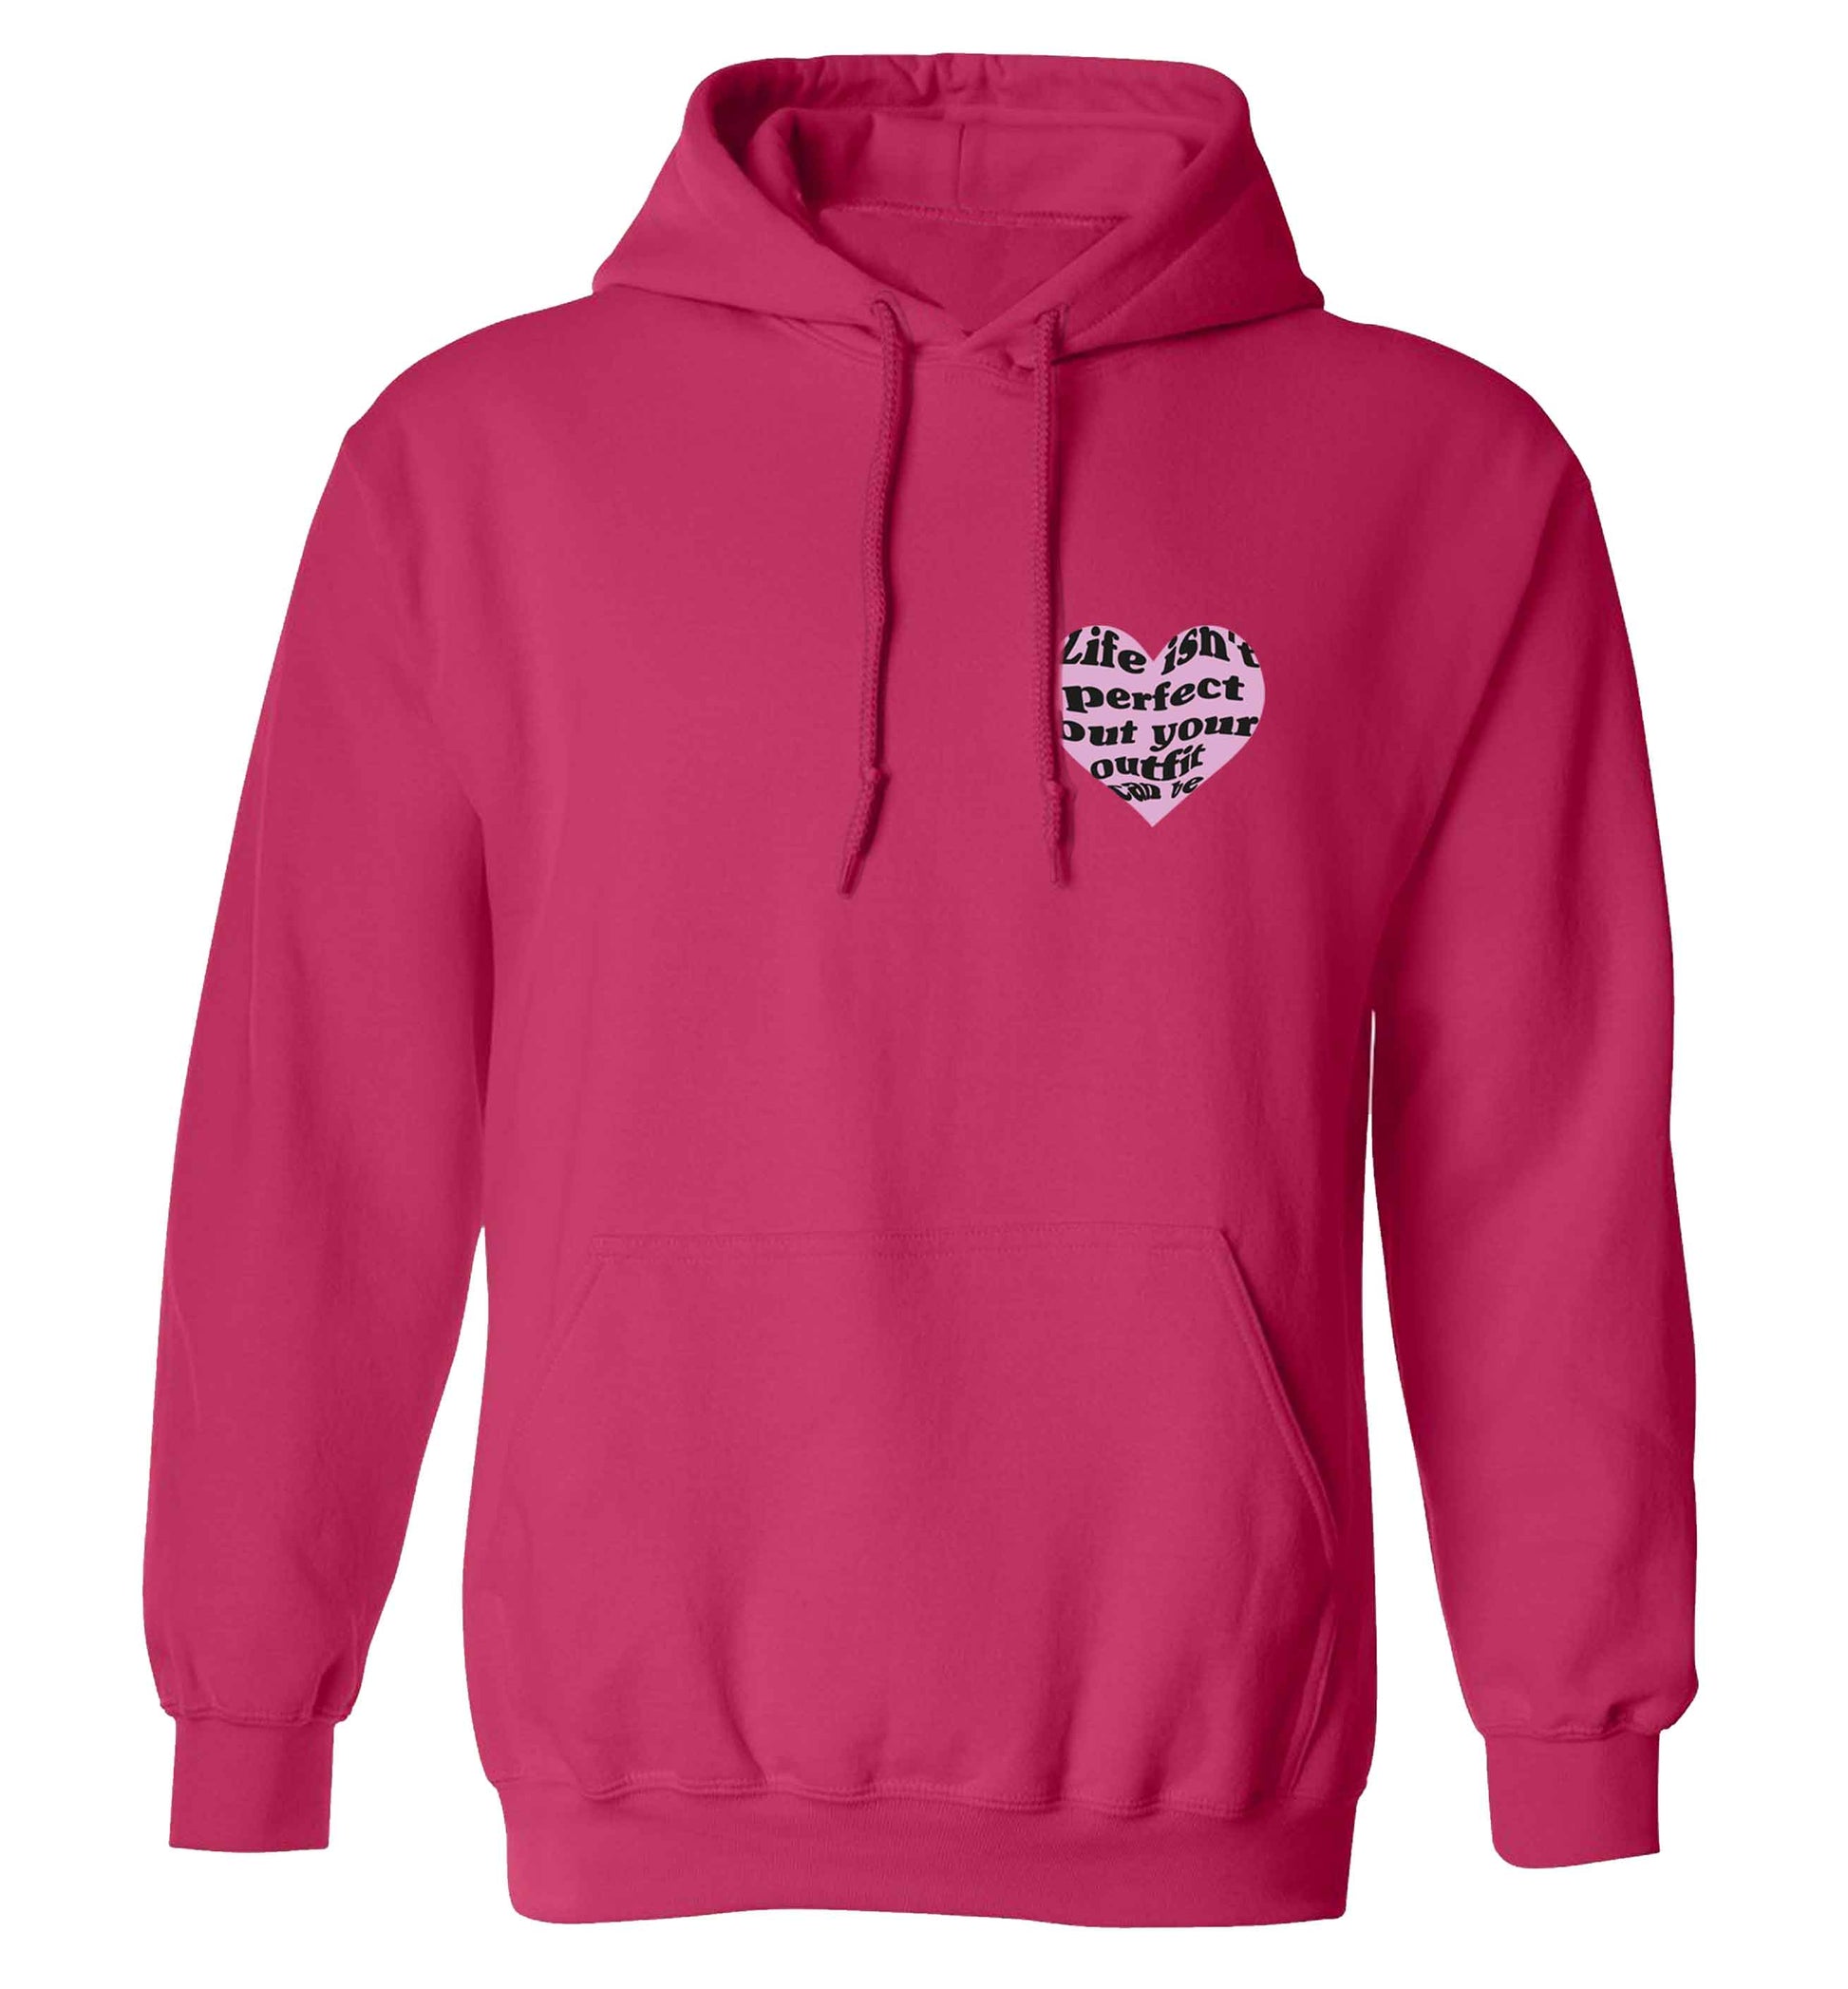 Life isn't perfect but your outfit can be adults unisex pink hoodie 2XL